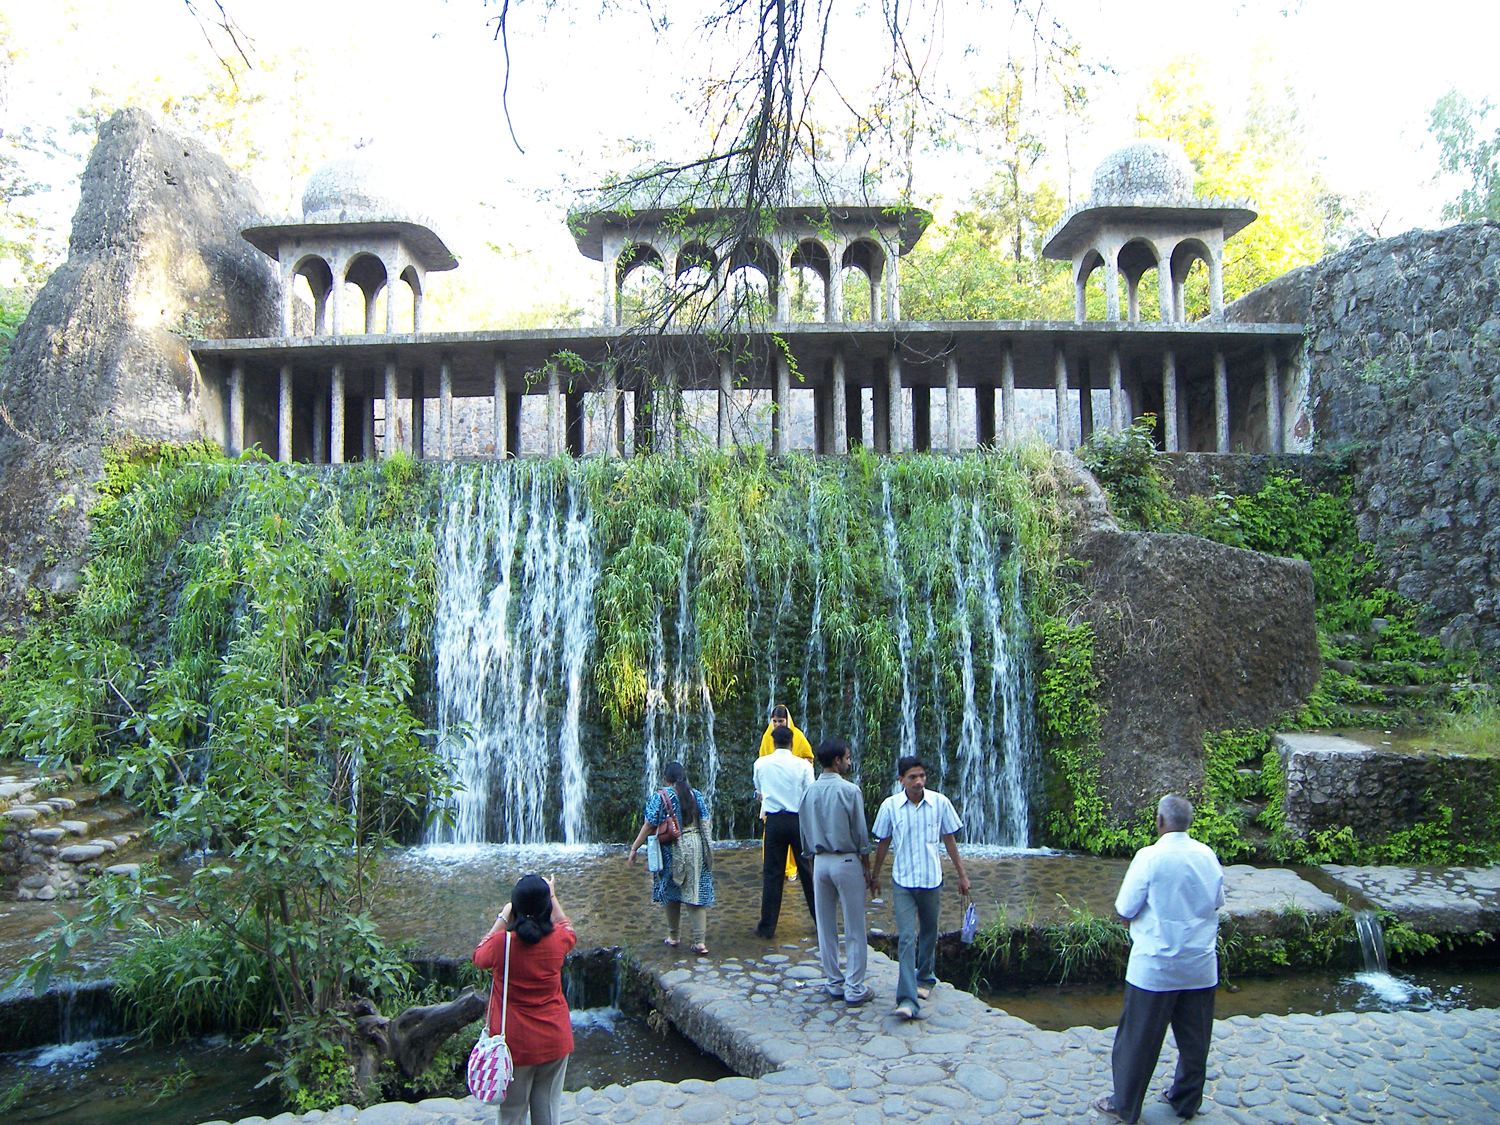 Explore The Fantasy World At The Rock Garden Of Chandigarh India